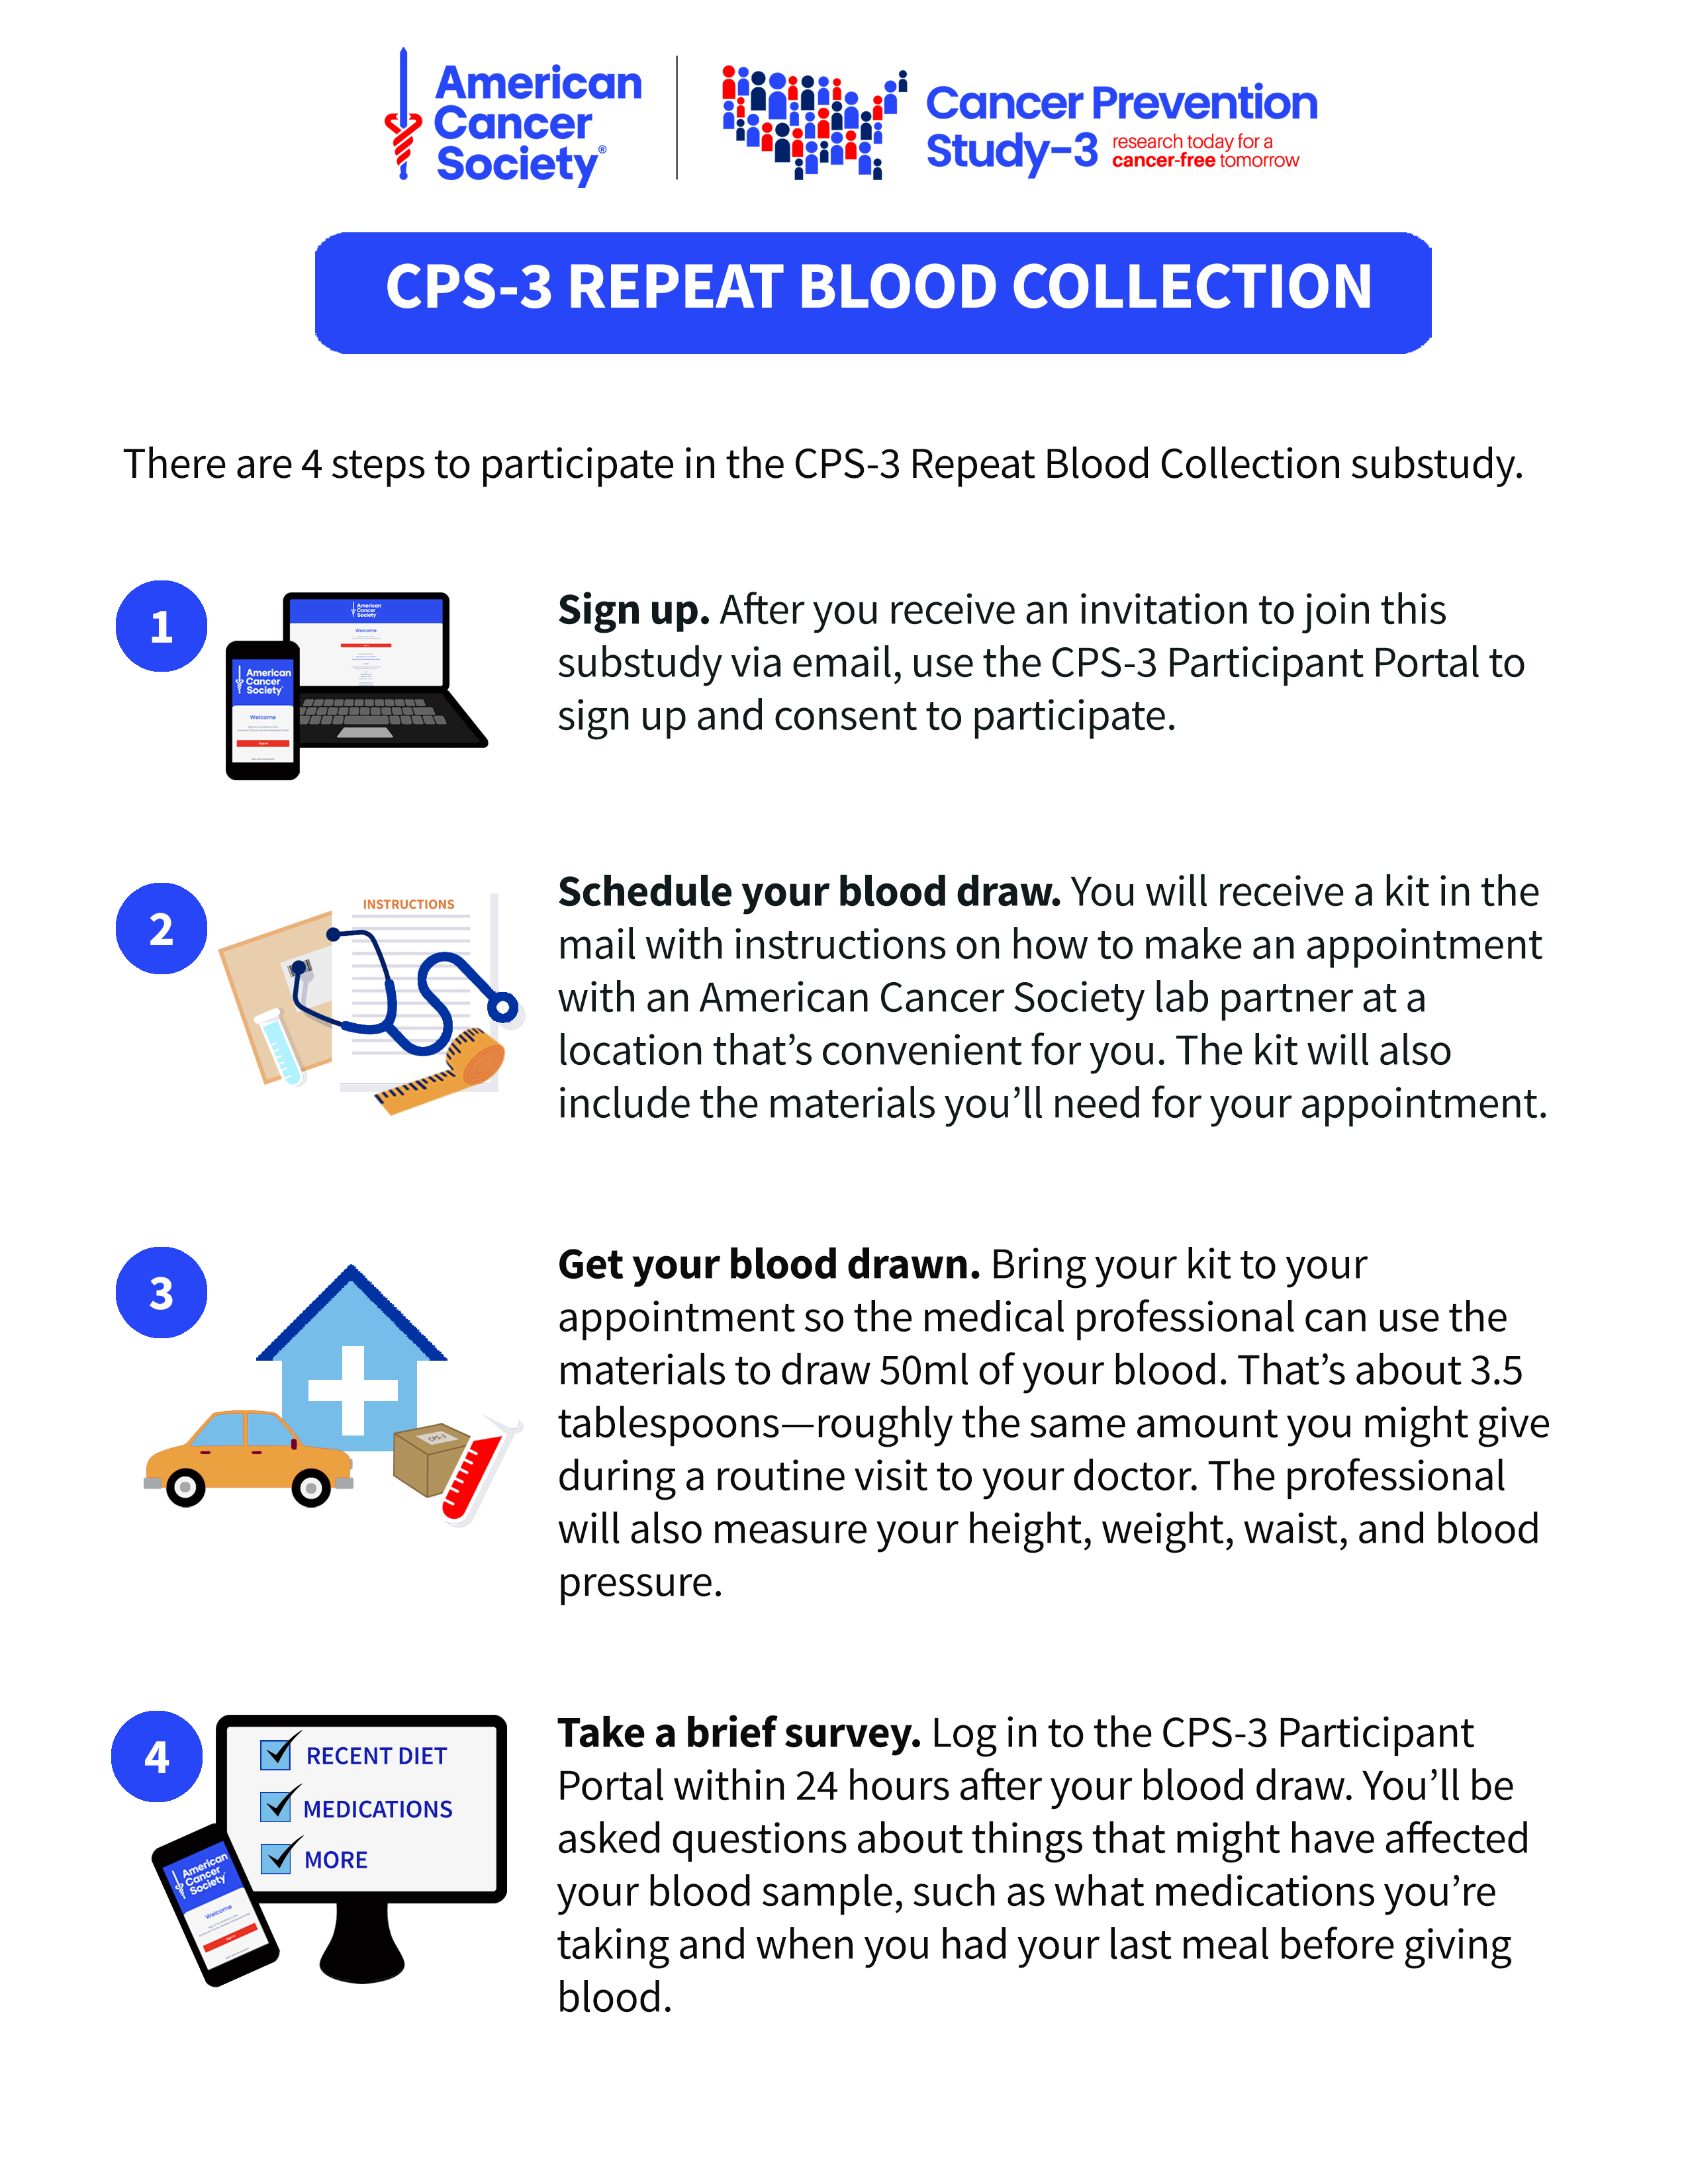 cps-3 repeat blood collection substudy infographic page 2